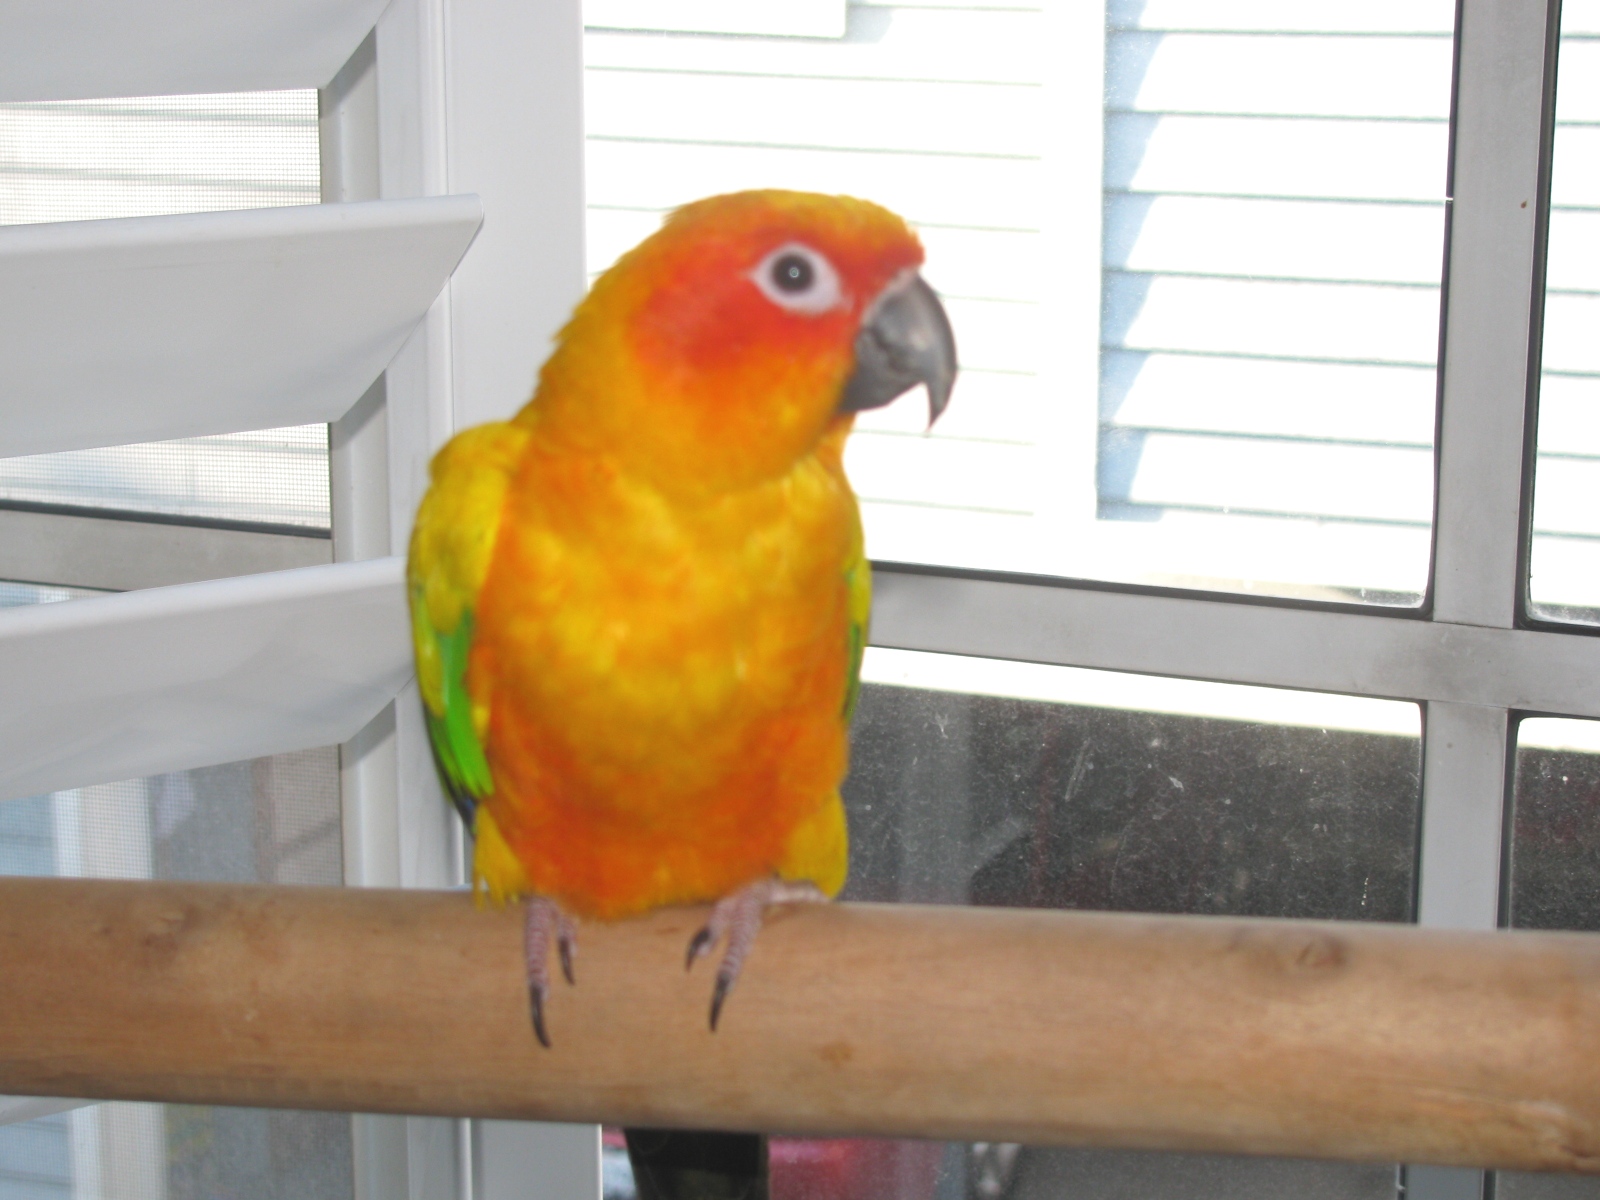 It would be glamorous to show off my beautiful flighted sun conure parrot outside in public by letting her free flight outside. I could have people come up ...